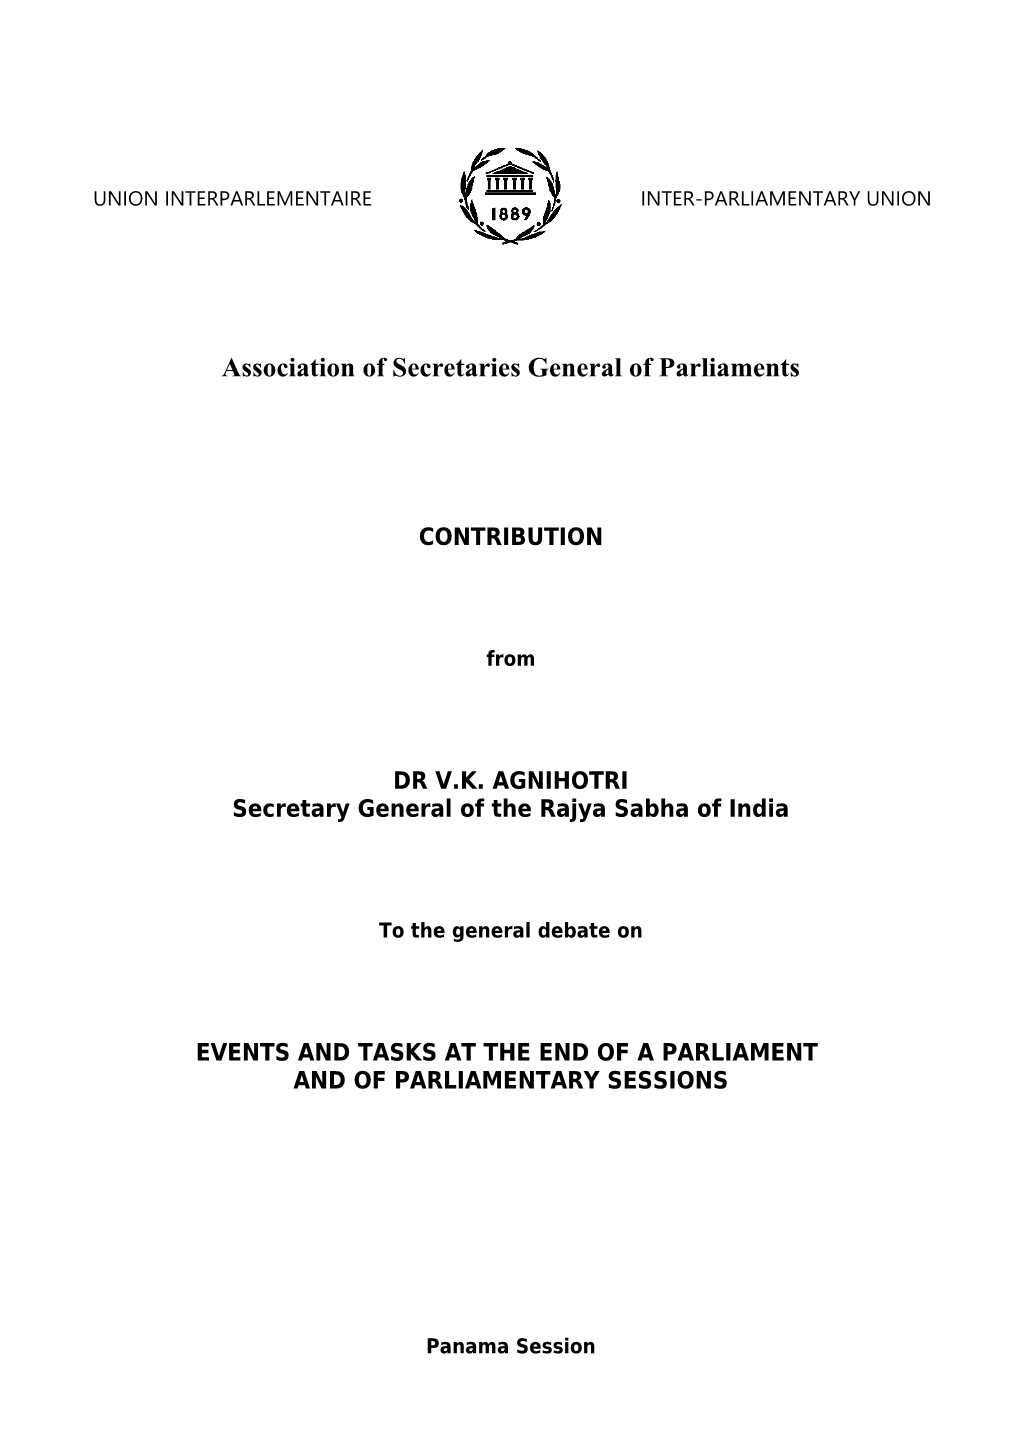 Events and Tasks at the End of a Parliament and of Parliament Sessions